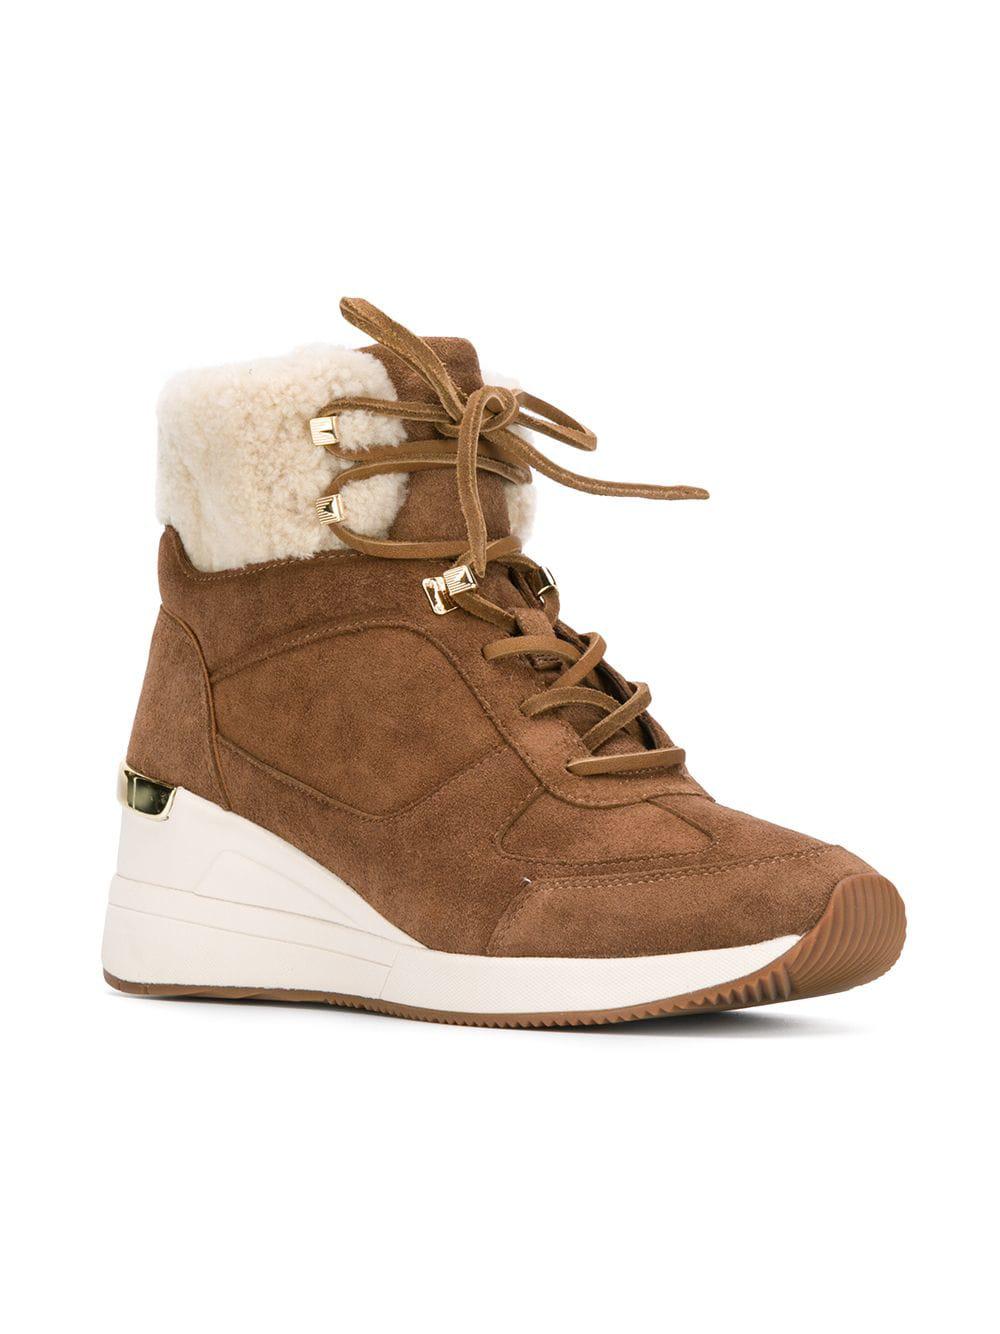 MICHAEL Michael Kors Suede Shearling Trim Ankle Boots in Brown - Lyst